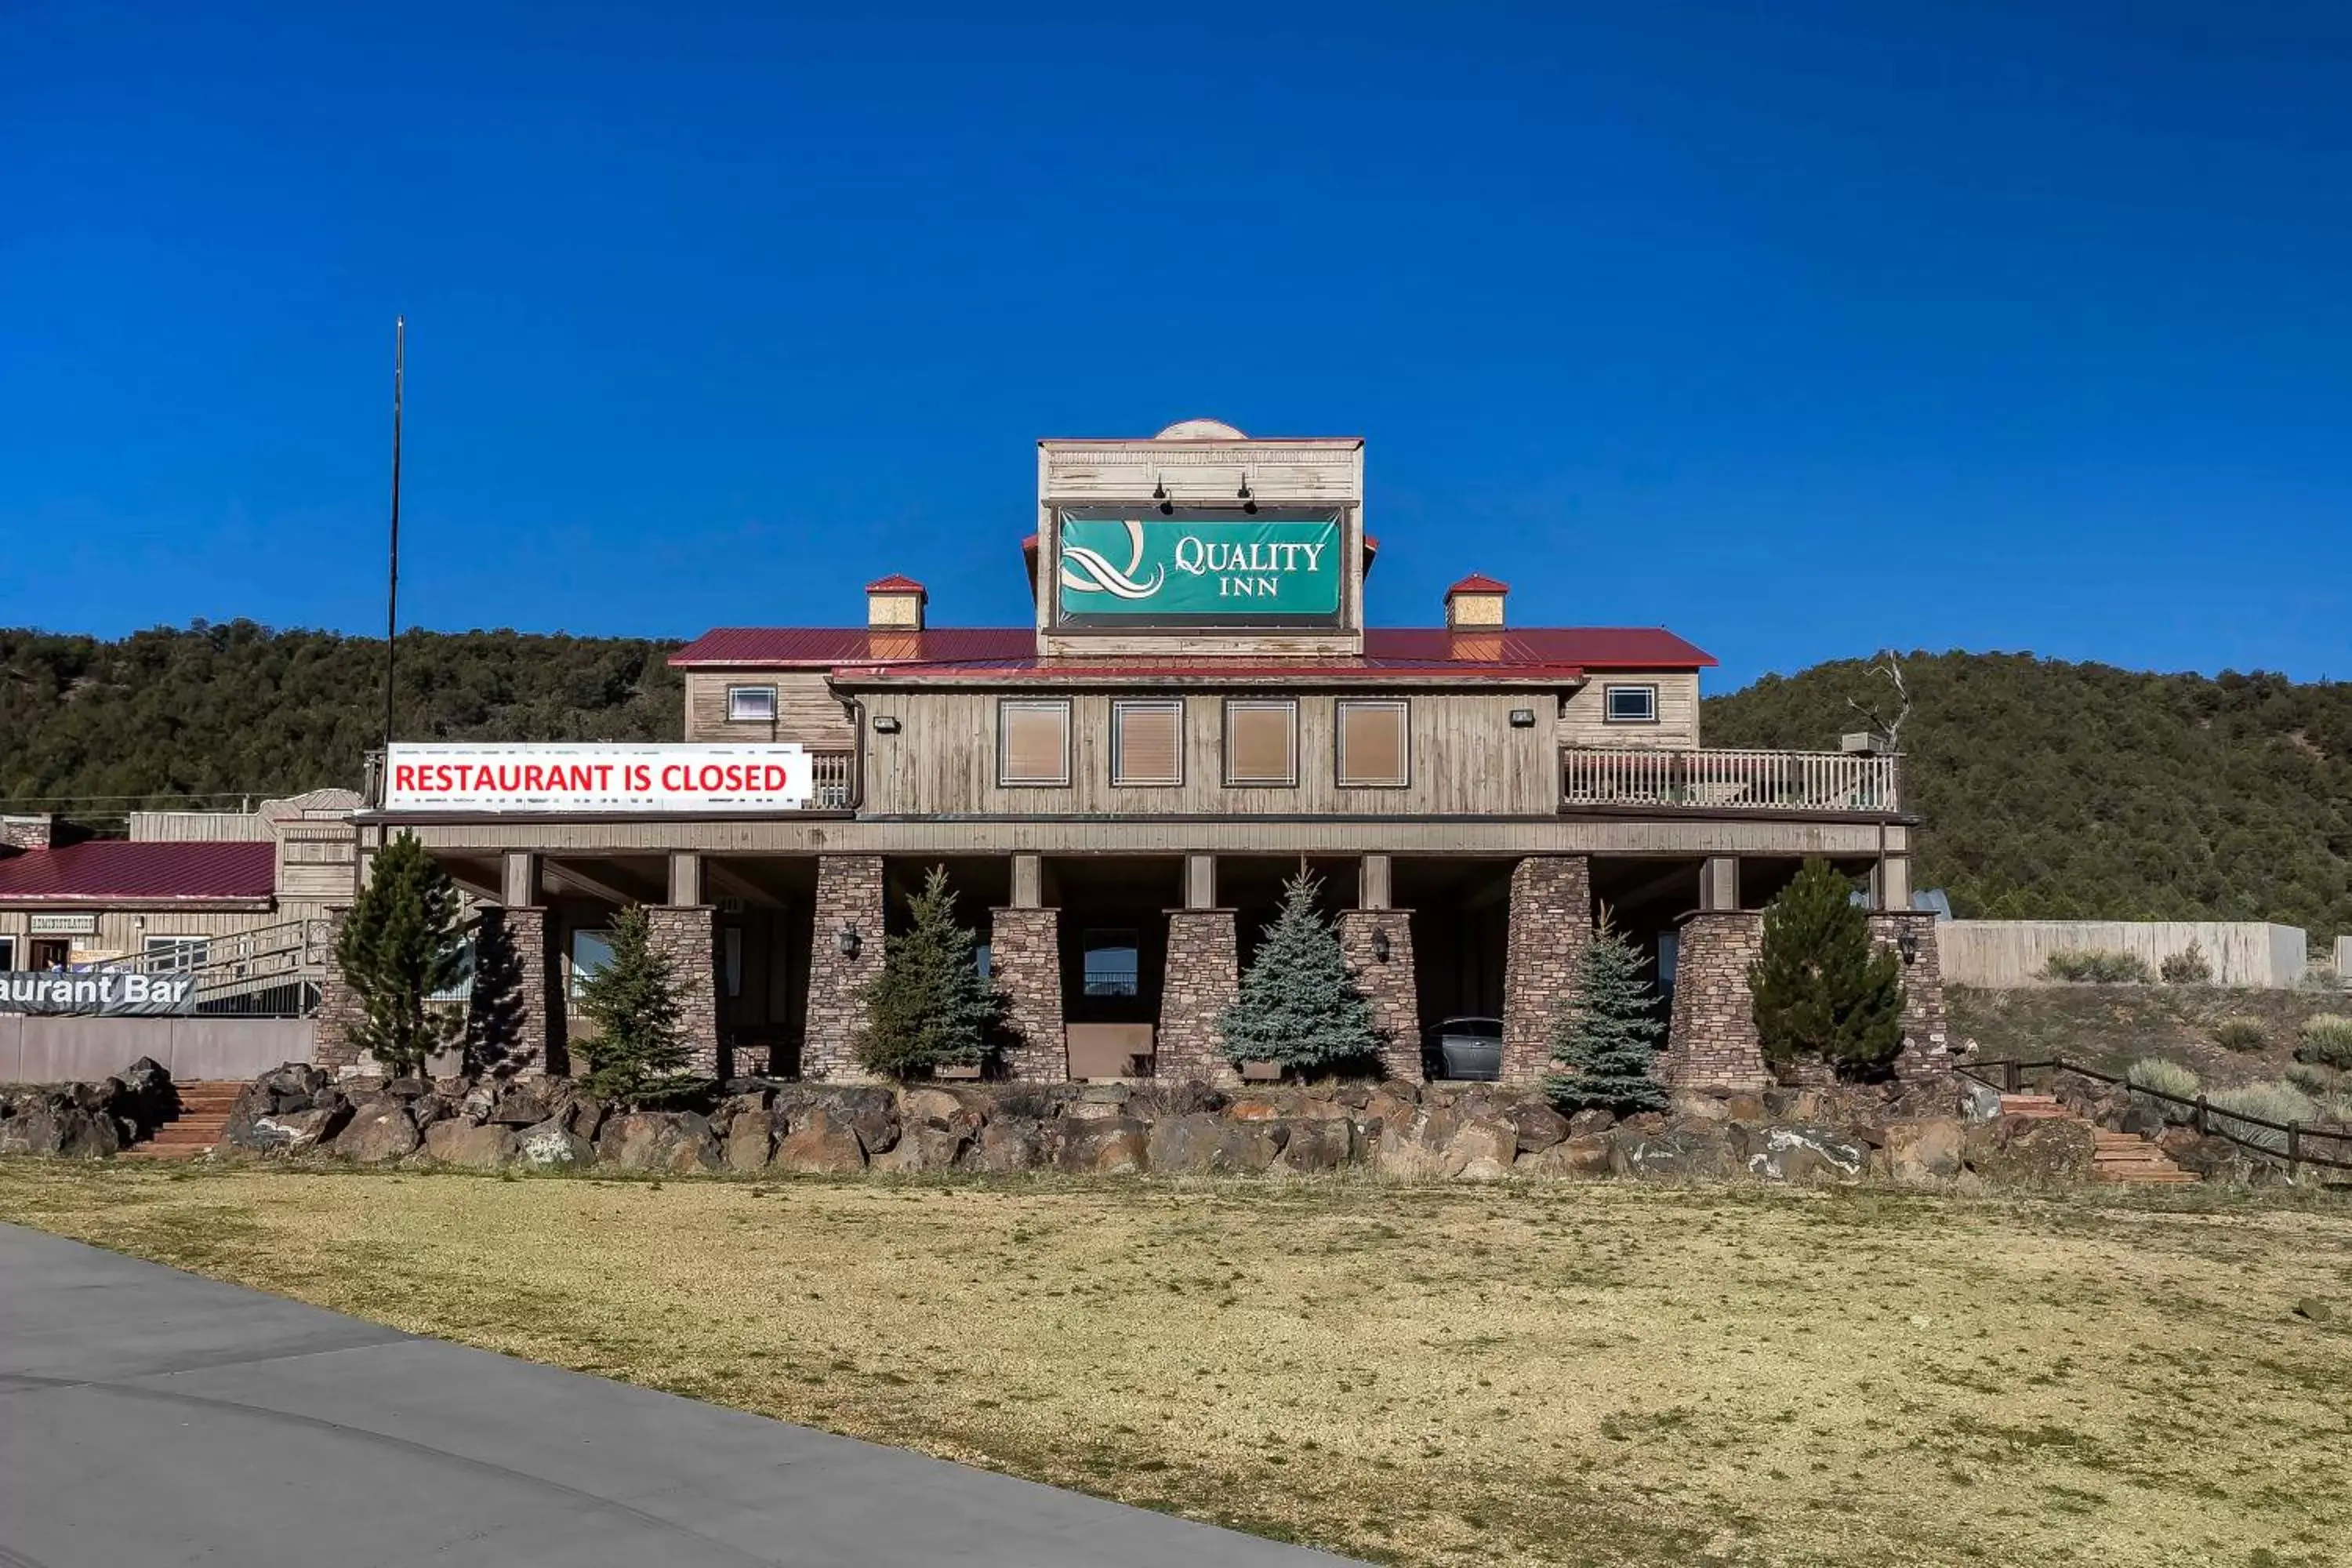 Property building in Quality Inn Bryce Canyon